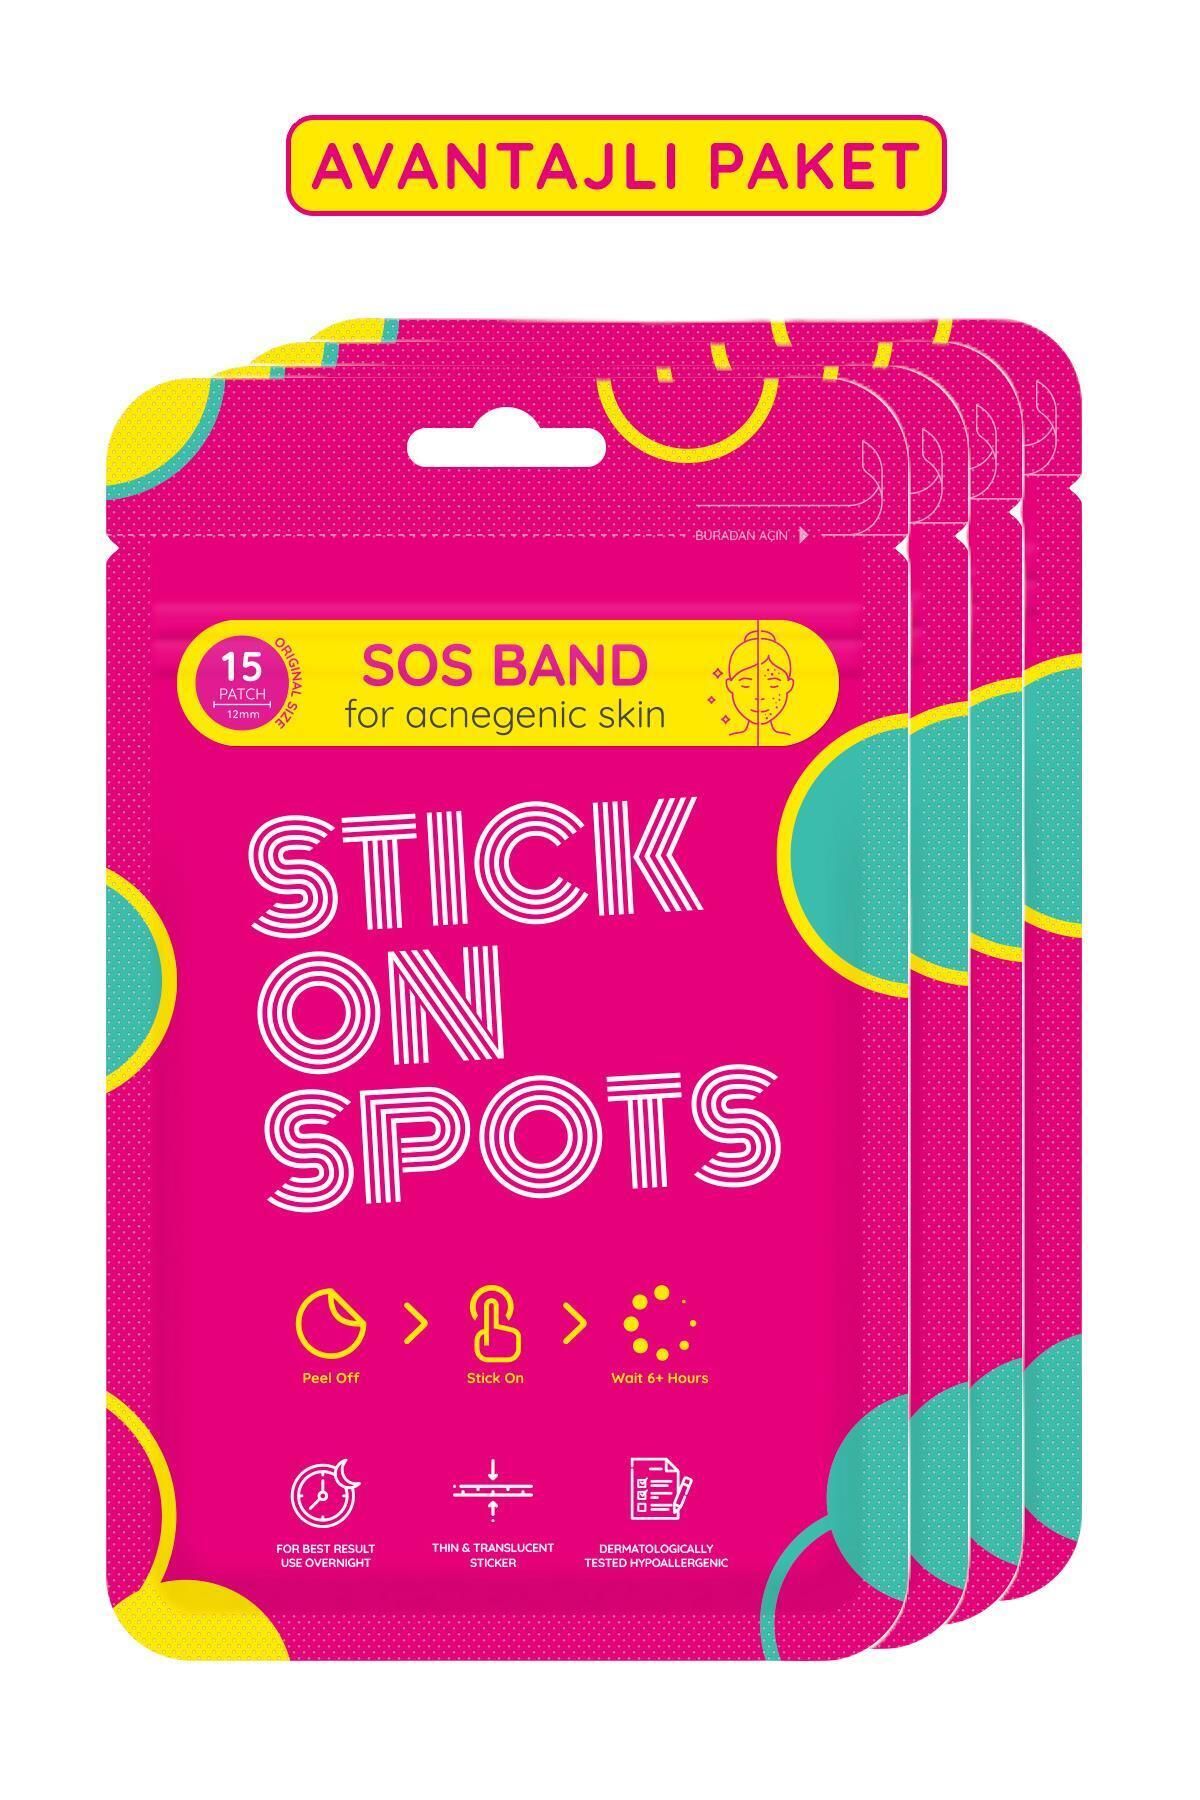 Stick On Spots Sos Band - 15 Adet Sivilce/Akne Patch x4 Sos Bant